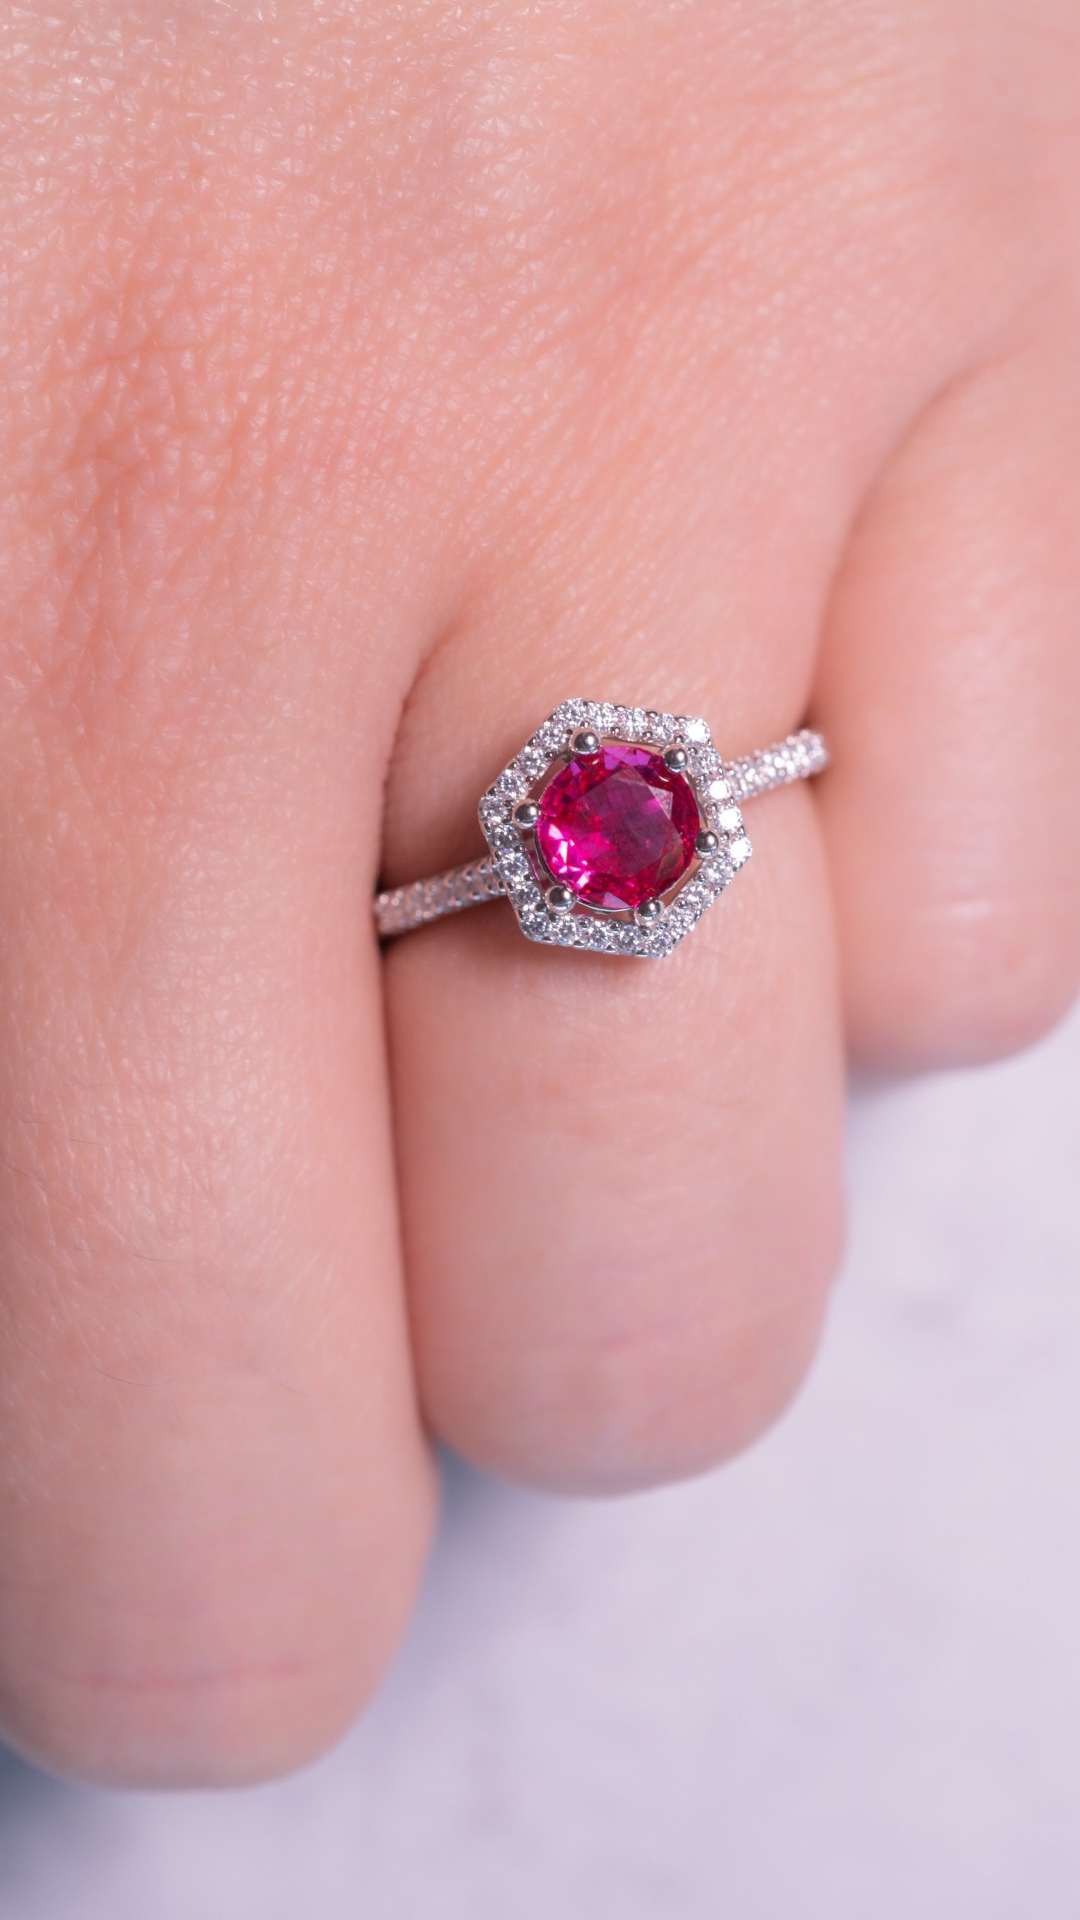 Amazon.com: Ruby Stone Ring 925 Sterling Silver Statement Ring For Women  Handmade Rings Gemstone Christmas Promise Ring Size US 7 Gift For Her :  Handmade Products